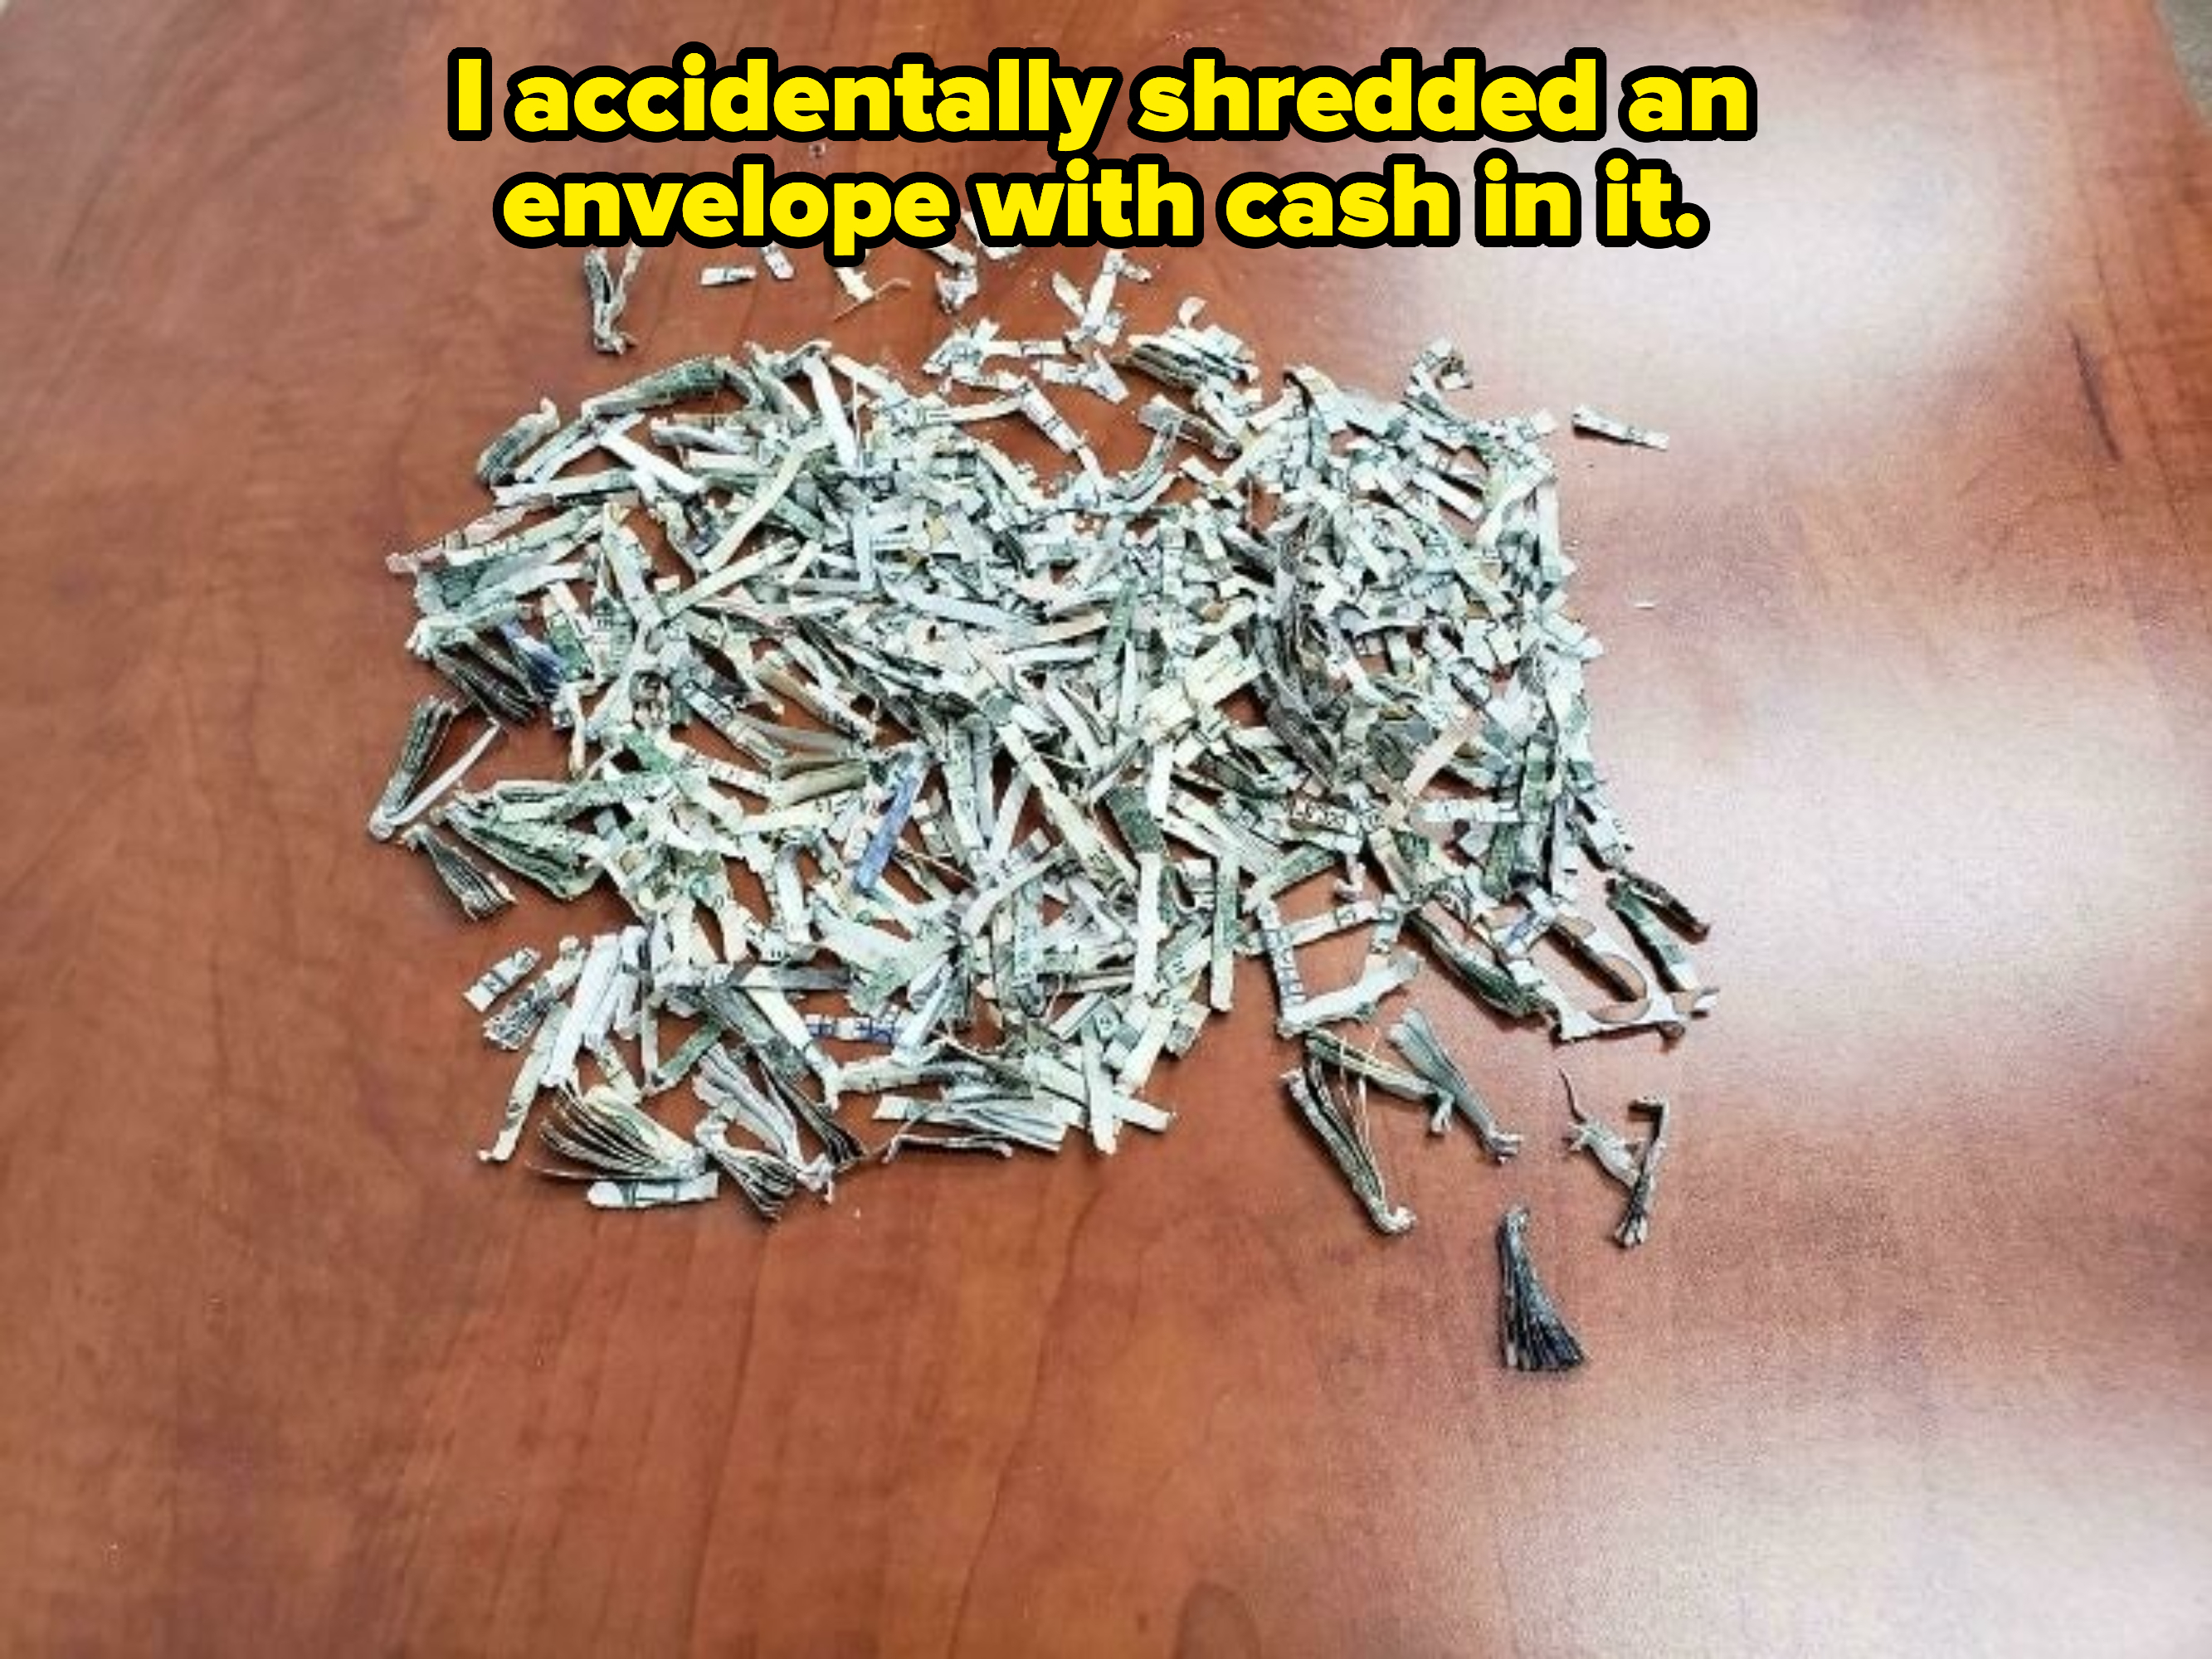 person accidentally shredded an envelope with cash in it